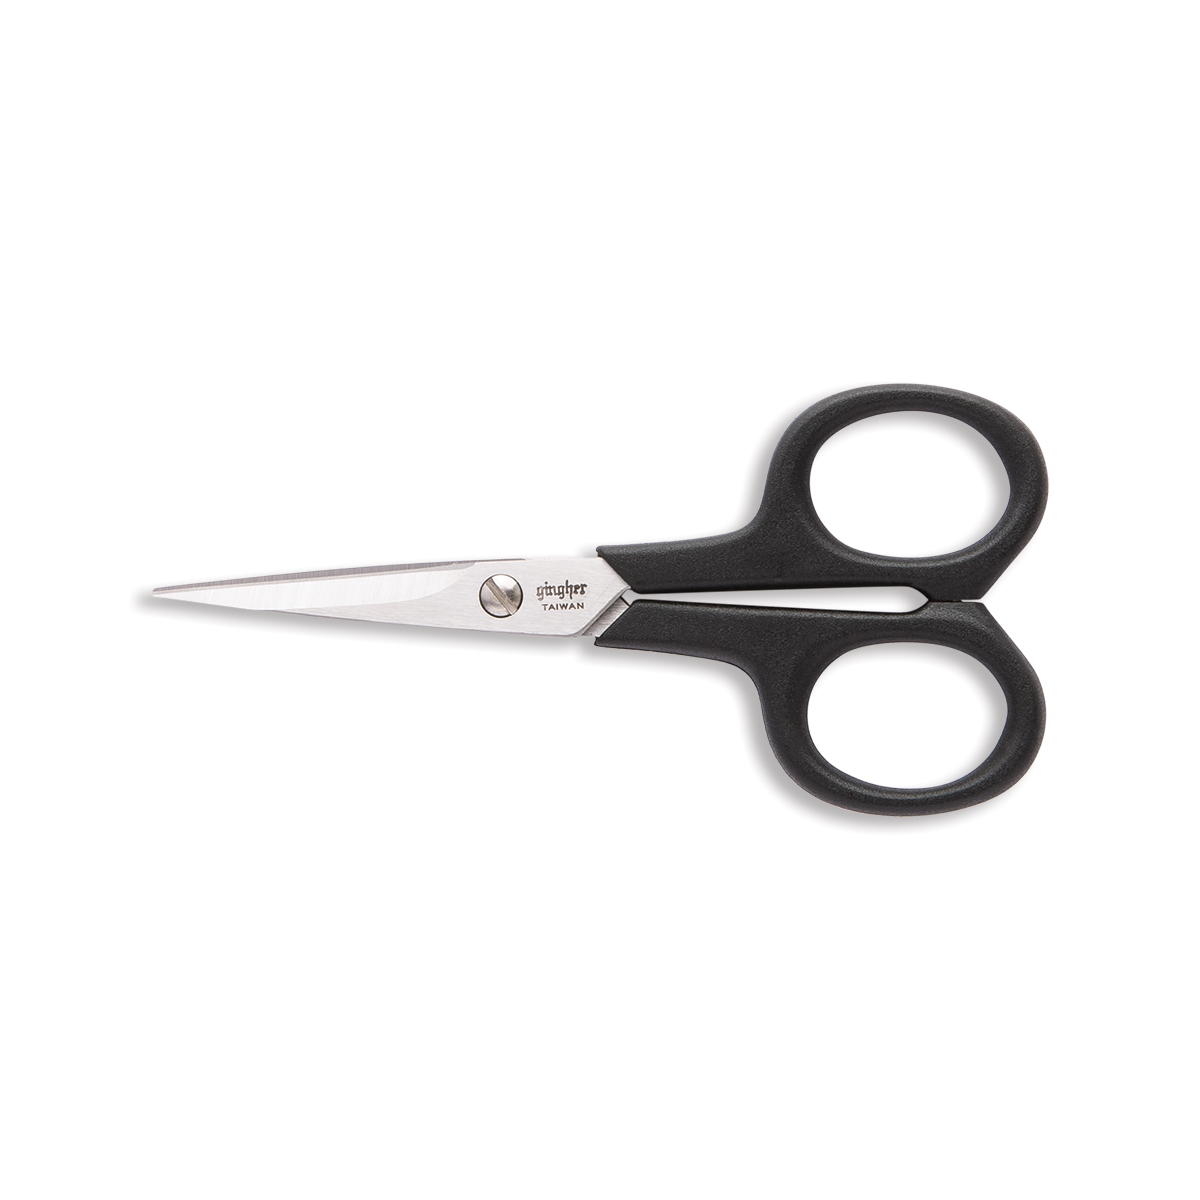 Gingher 4 in. Lightweight Embroidery Scissors